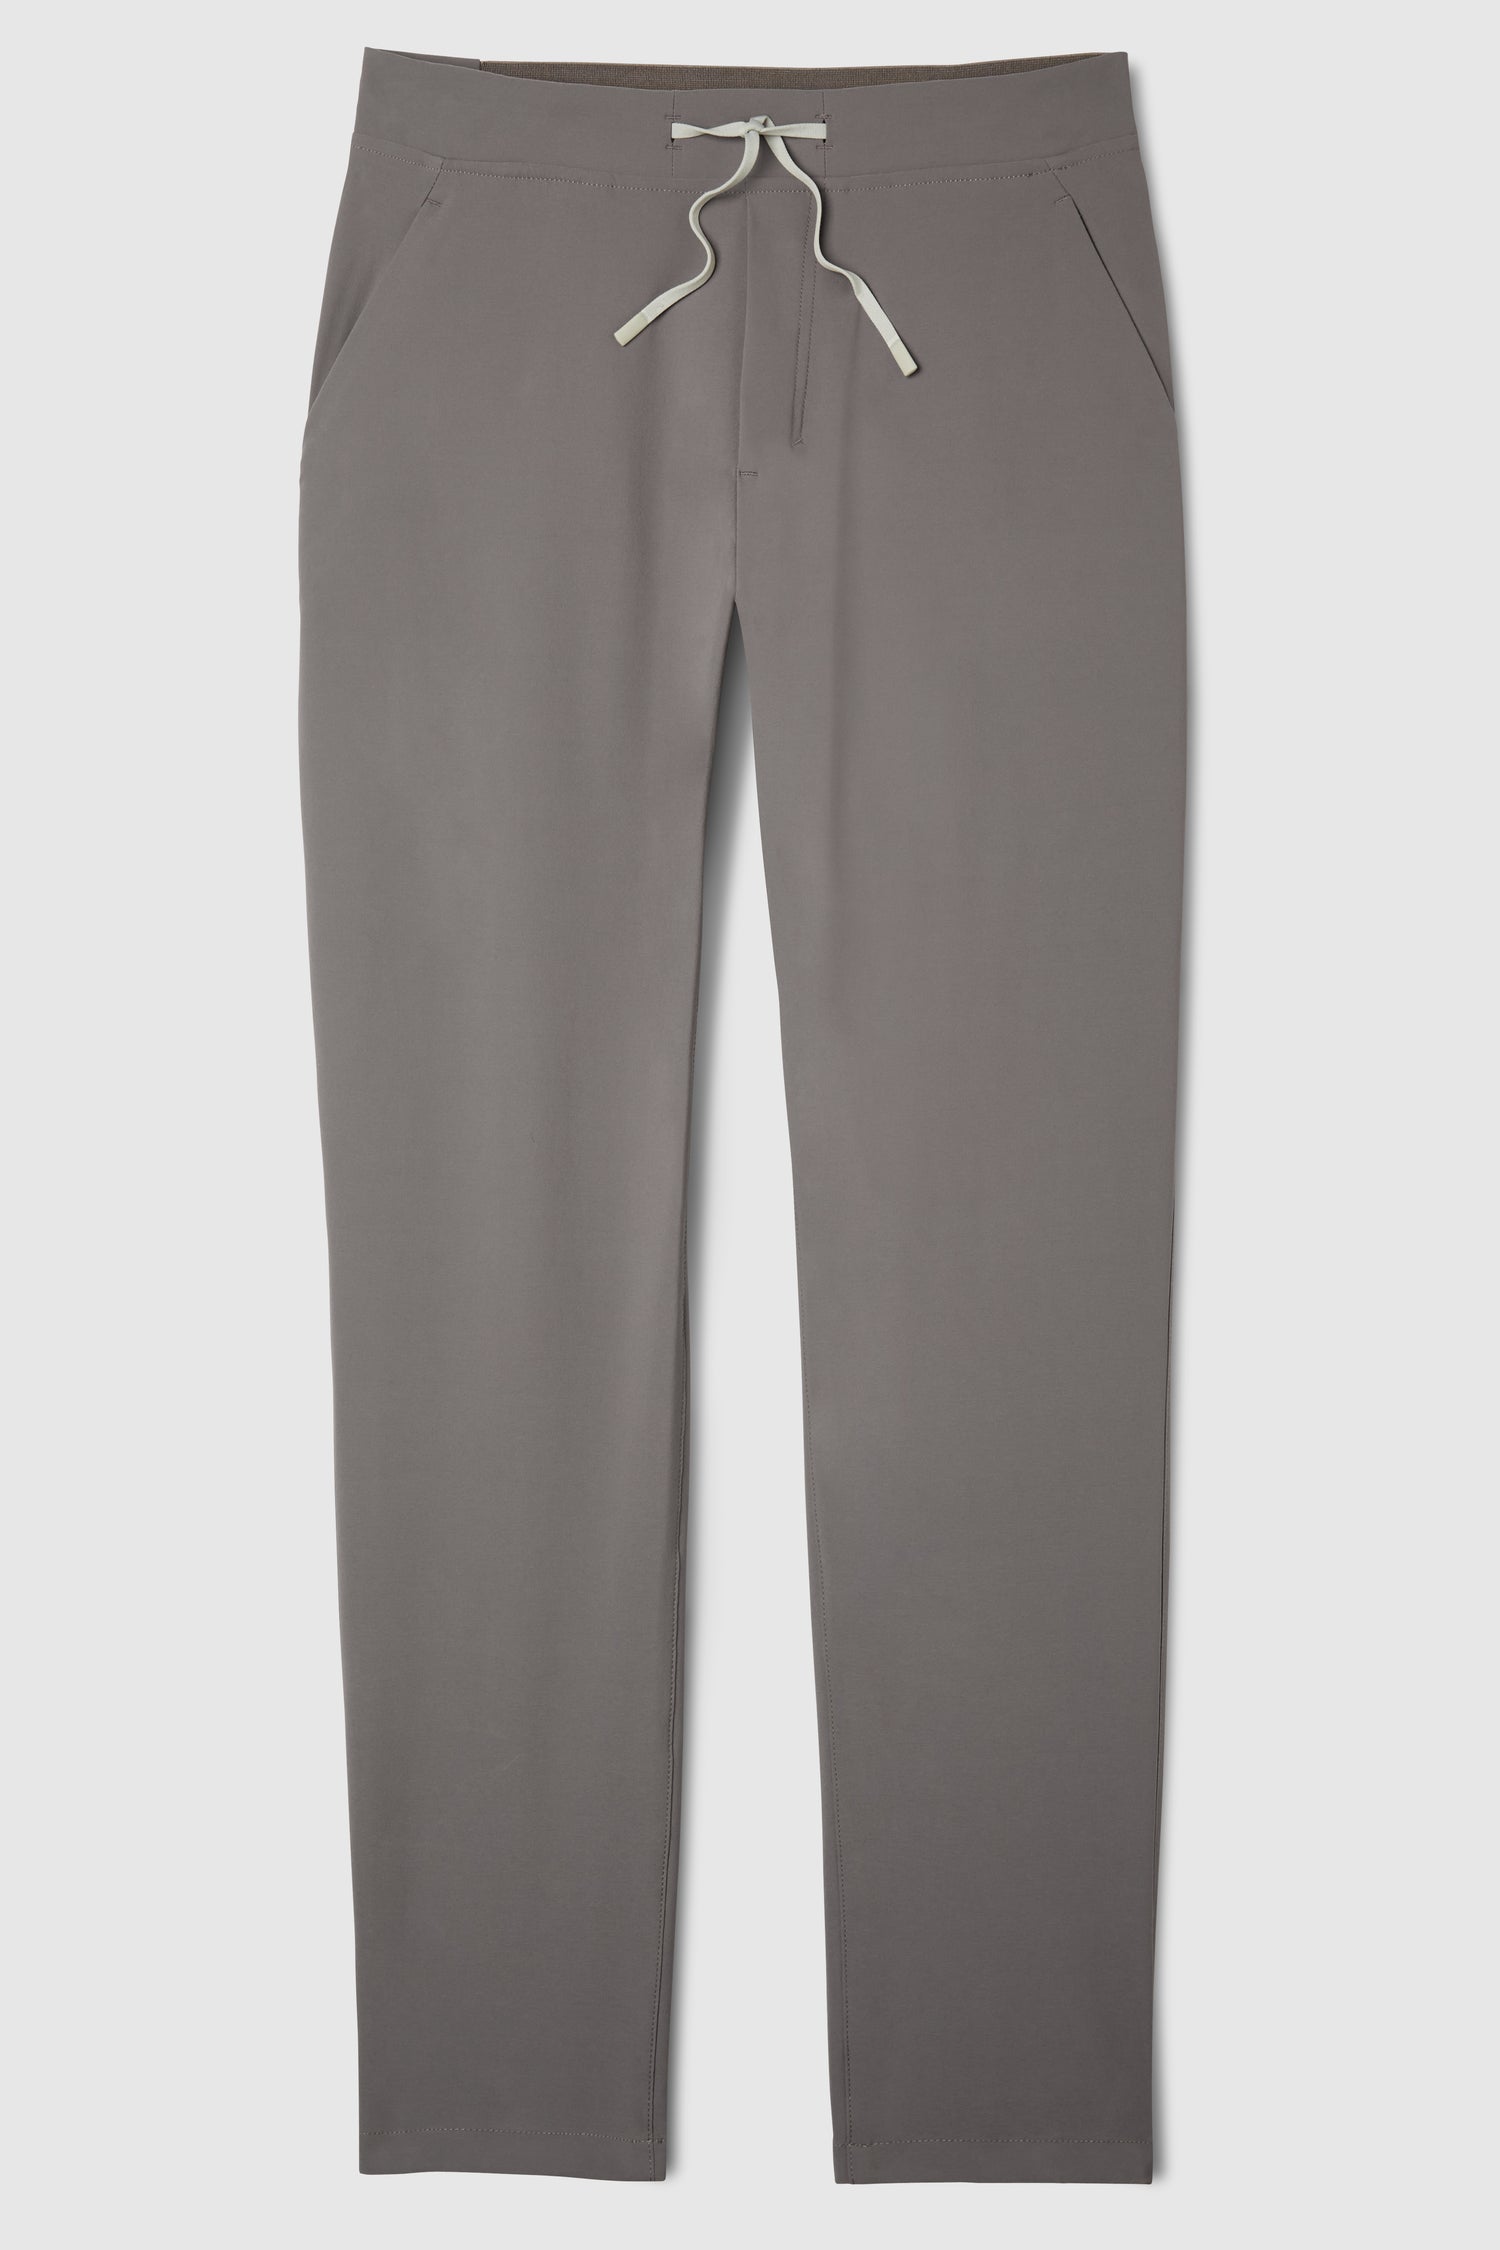 Friday FWD Men's Stretch Commuter Pant - FRIDAYFWD - KEYLOOK - 10